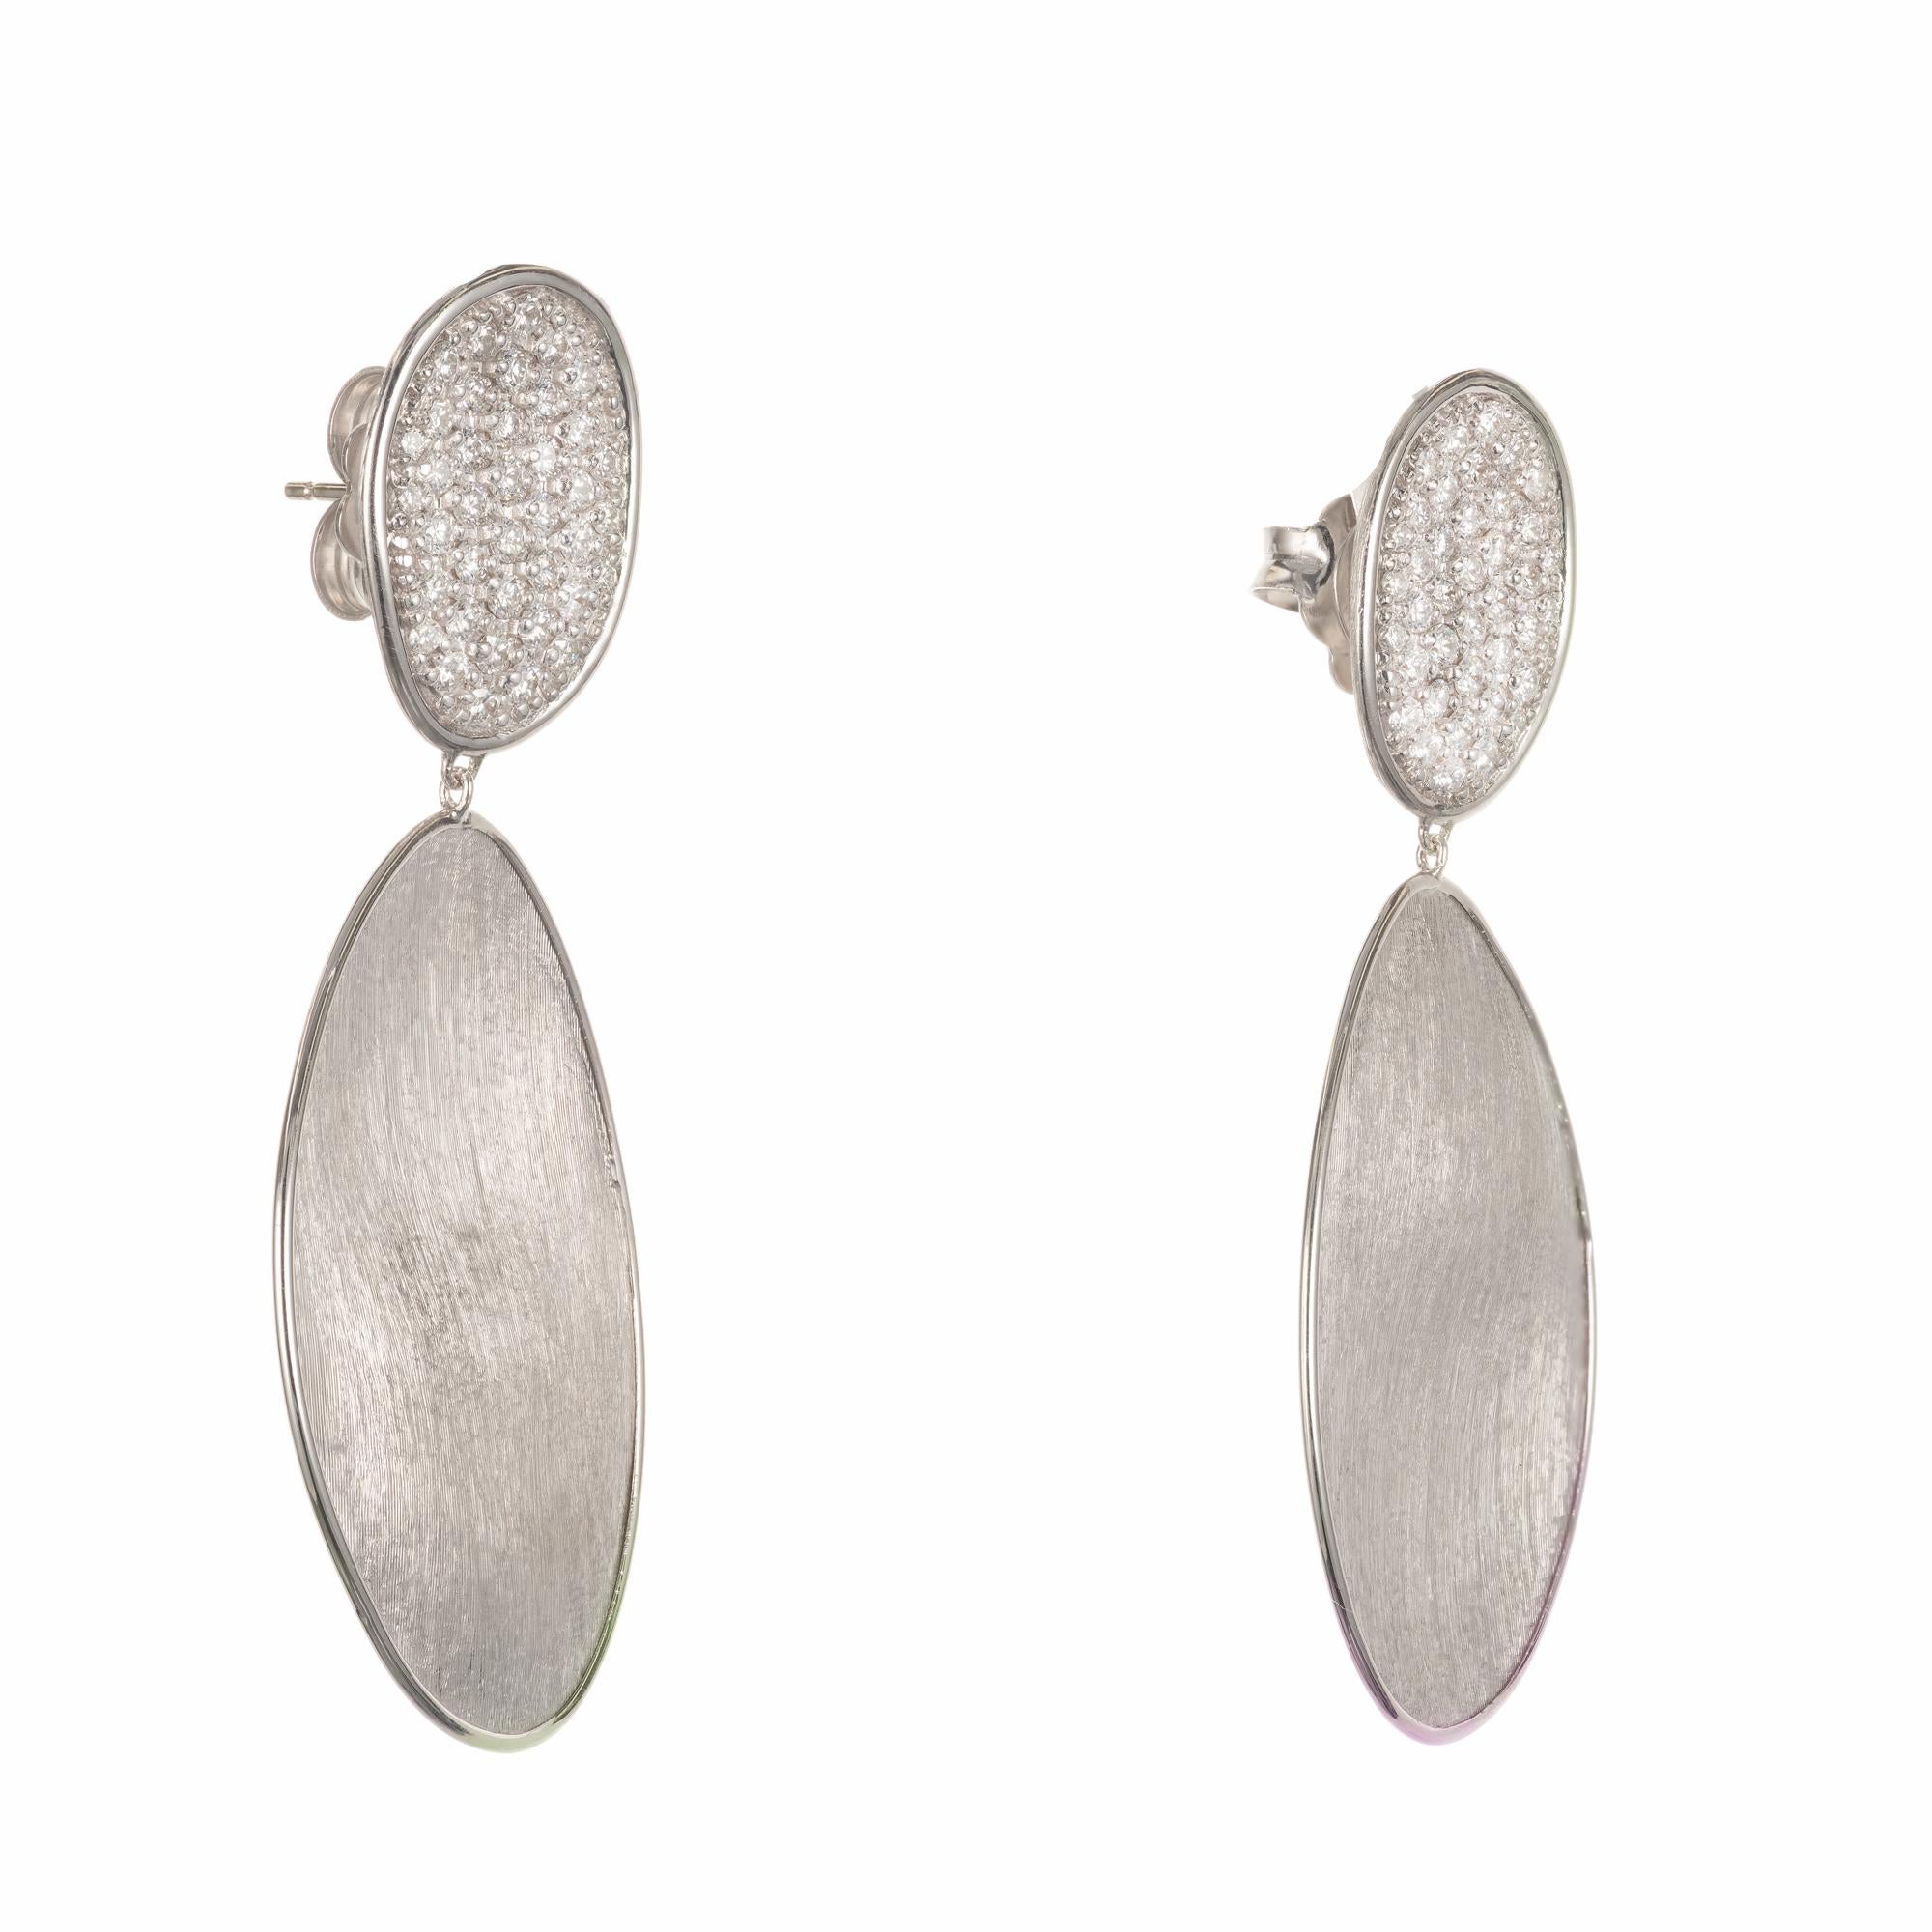 18k white gold drop dangle earrings from the Marco Bicego lunaria collection with pave round brilliant diamonds set into 18k white tops. An additional 18k white gold hand engraved drop hangs below for a total length of 2.25 Inches

78 round